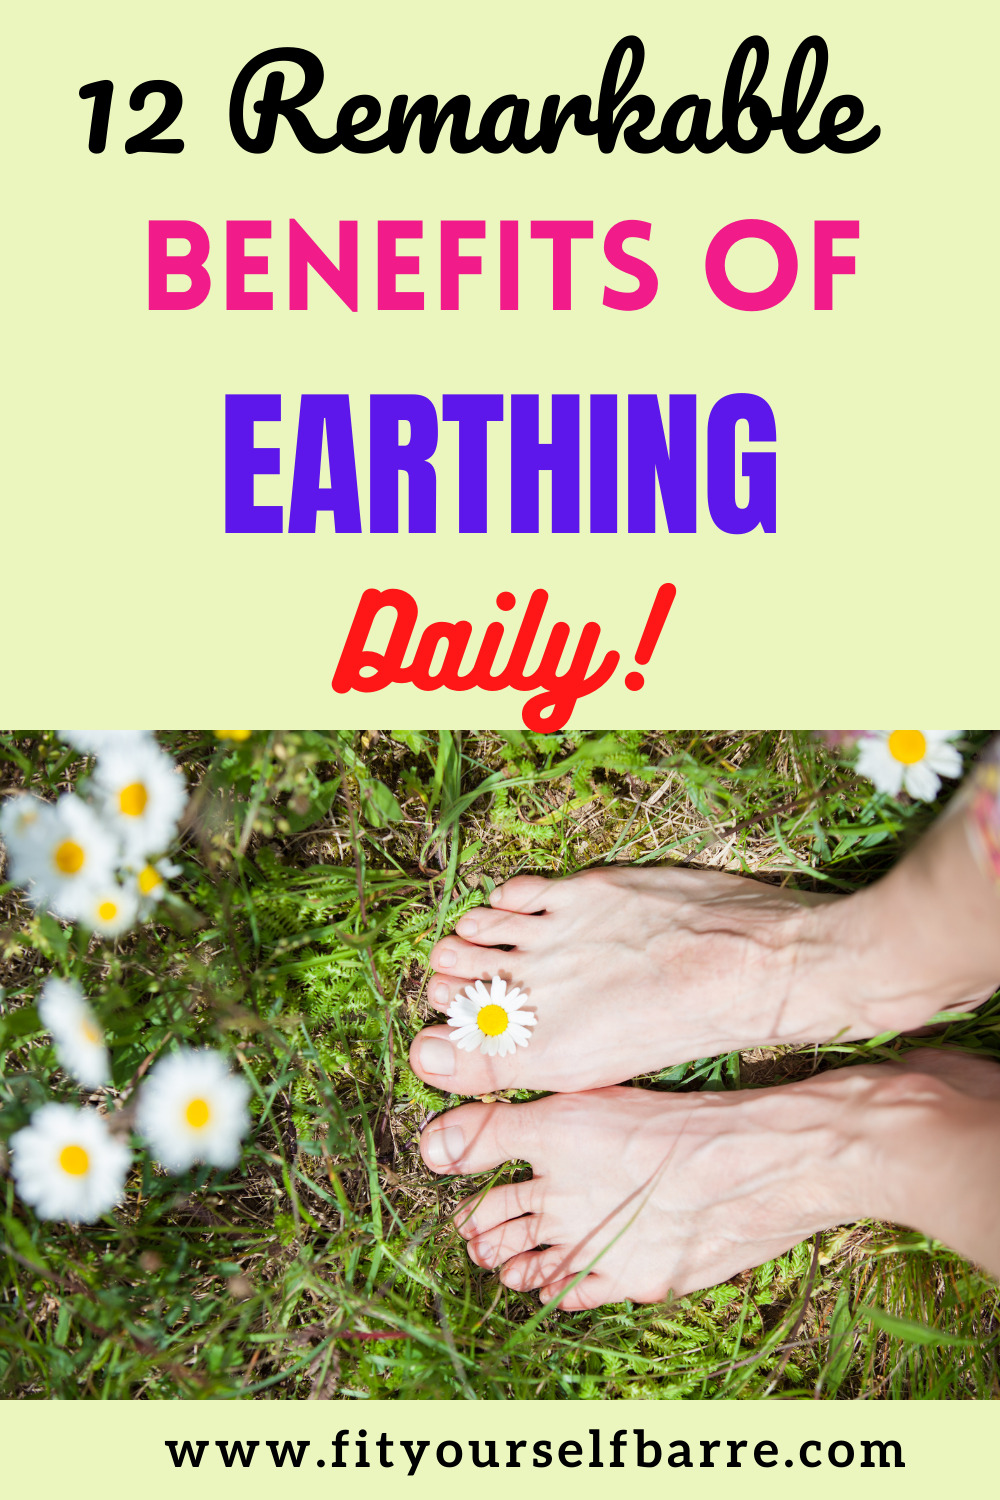 Earthing health benefits- a woman sitting barefoot on grass